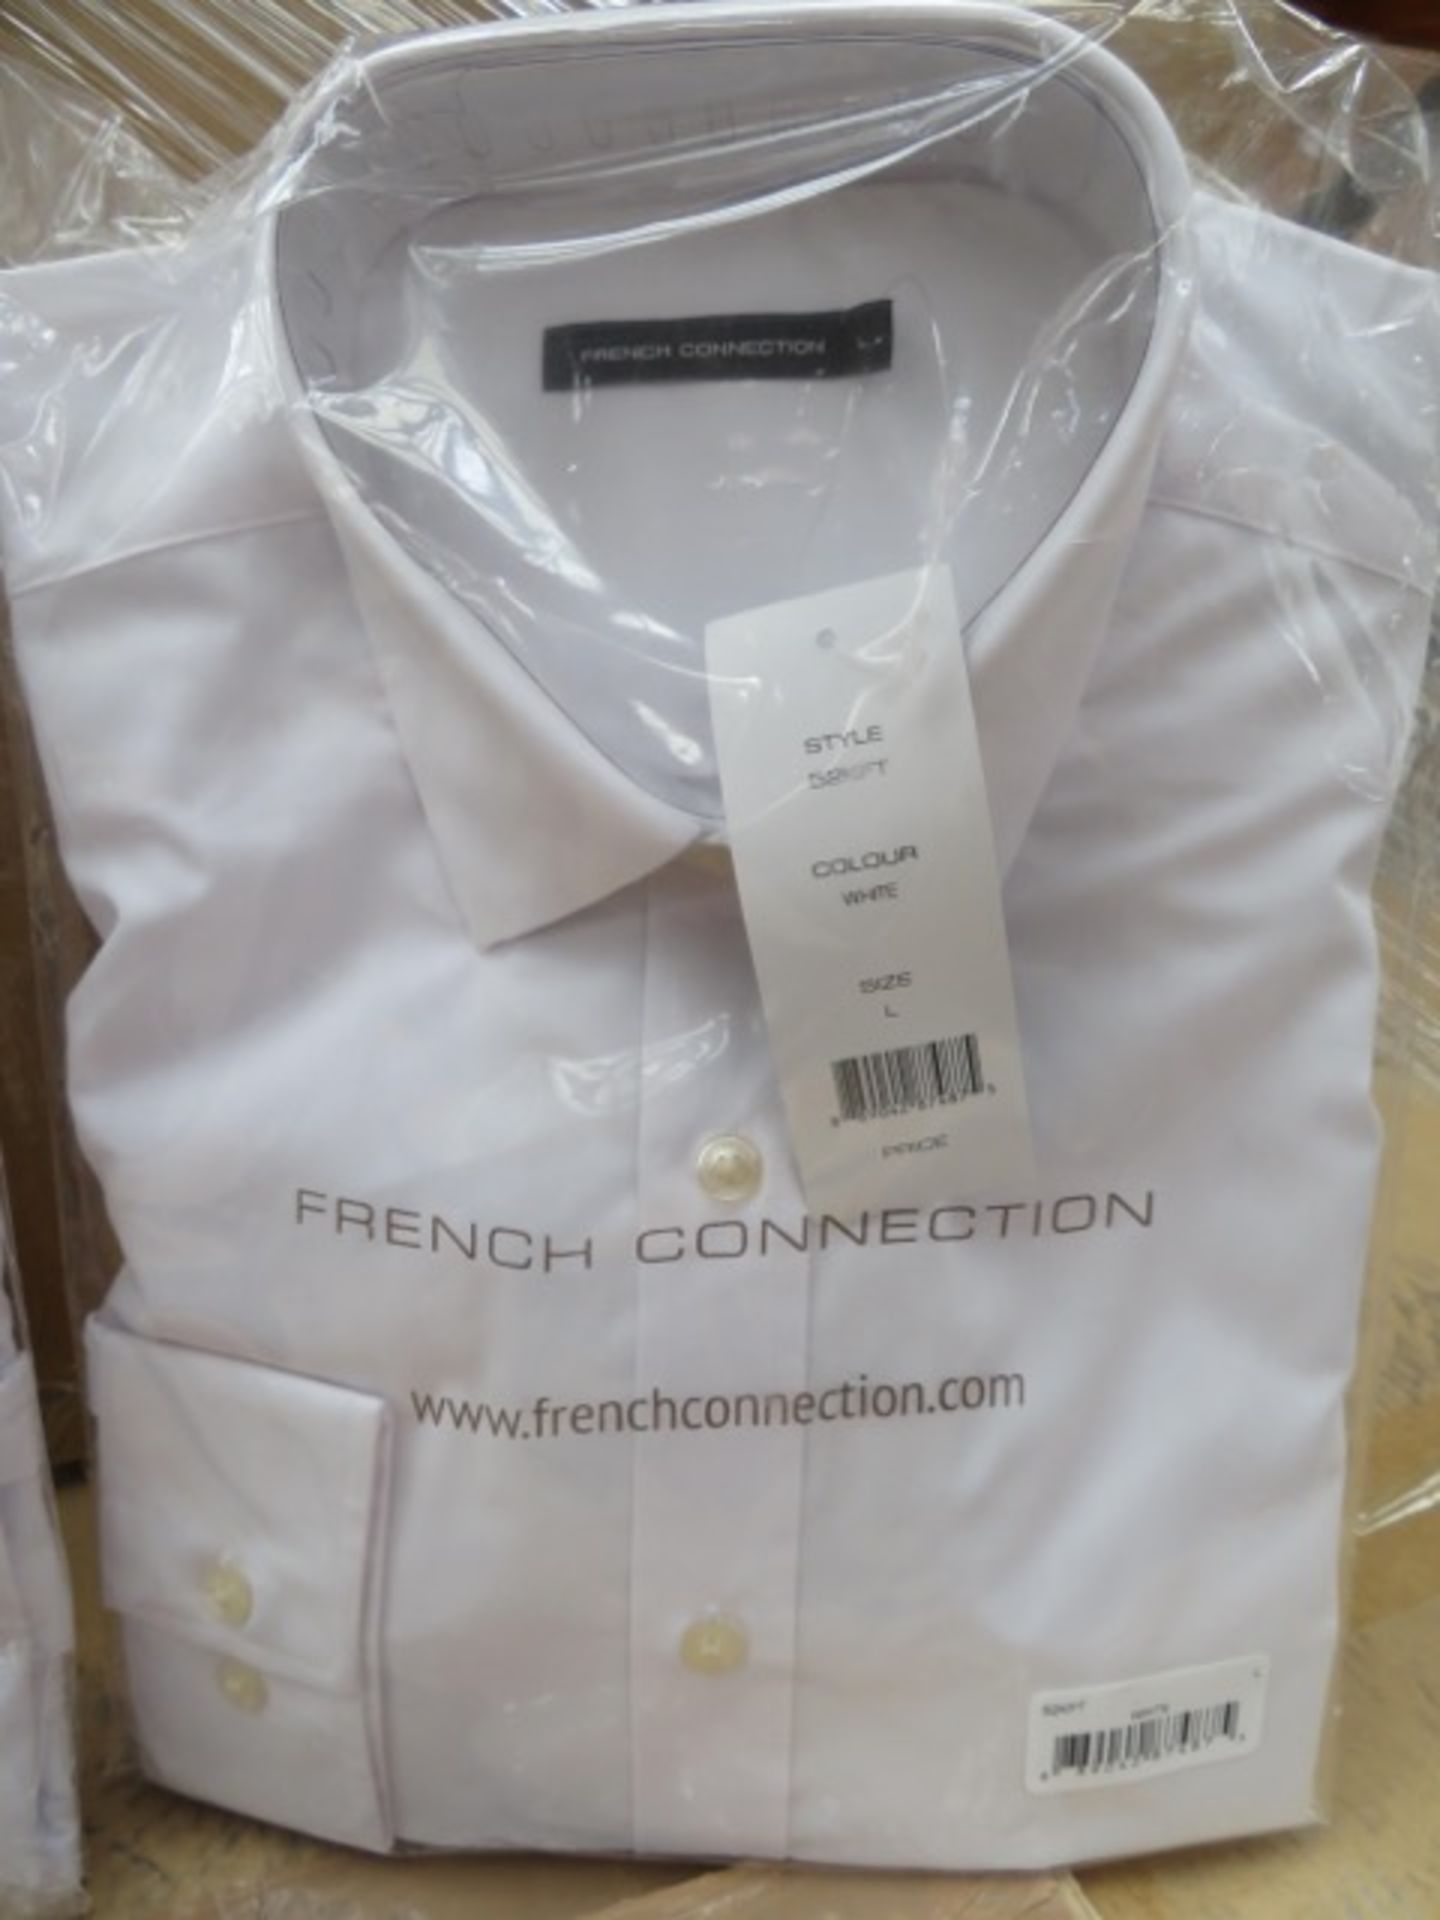 20 x Brand New French Connection Formal White Long Sleeve Shirts in Various Sizes. Huge Re-Sale - Image 2 of 2